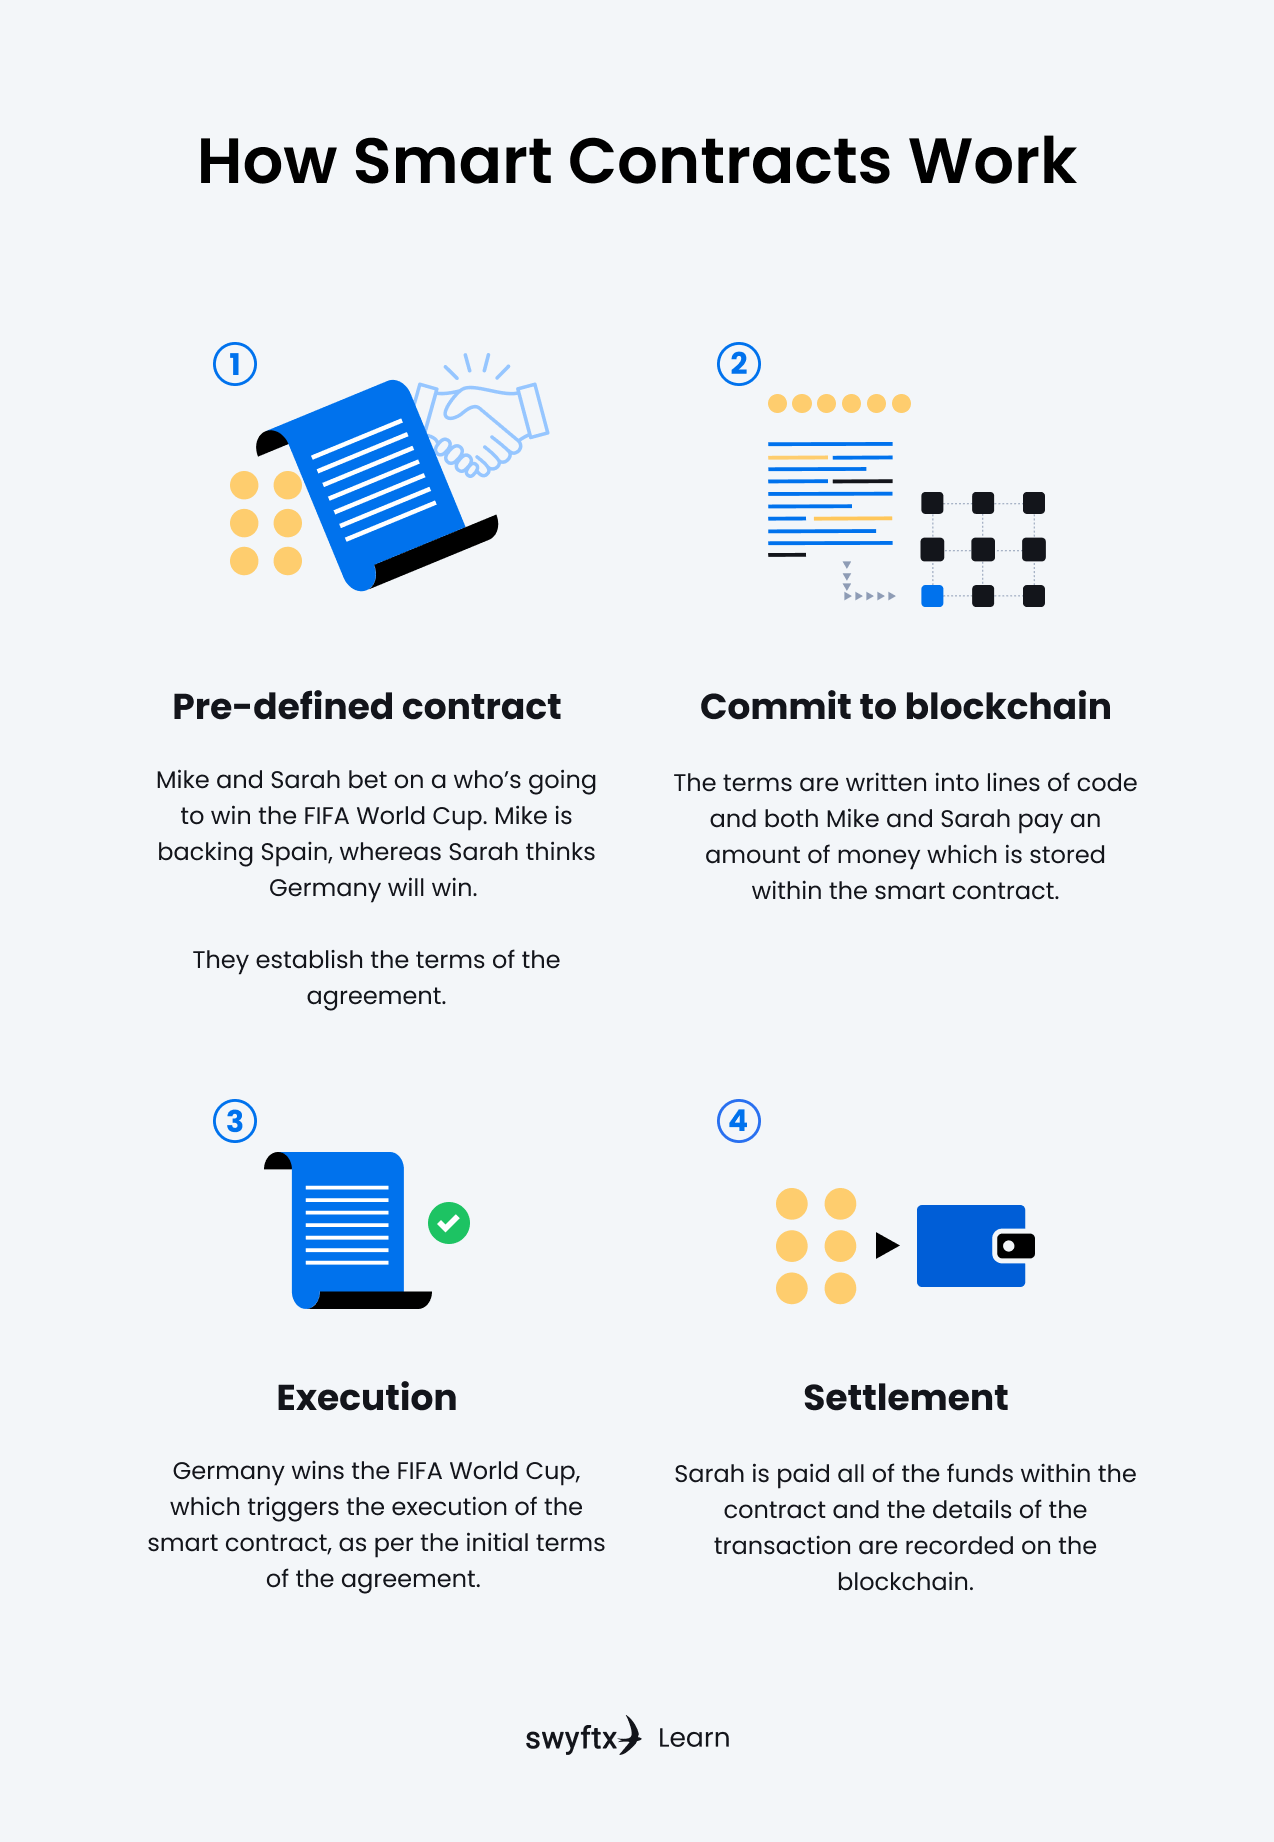 What is Ethereum? Getting to Know Smart Contracts - INX One Platform